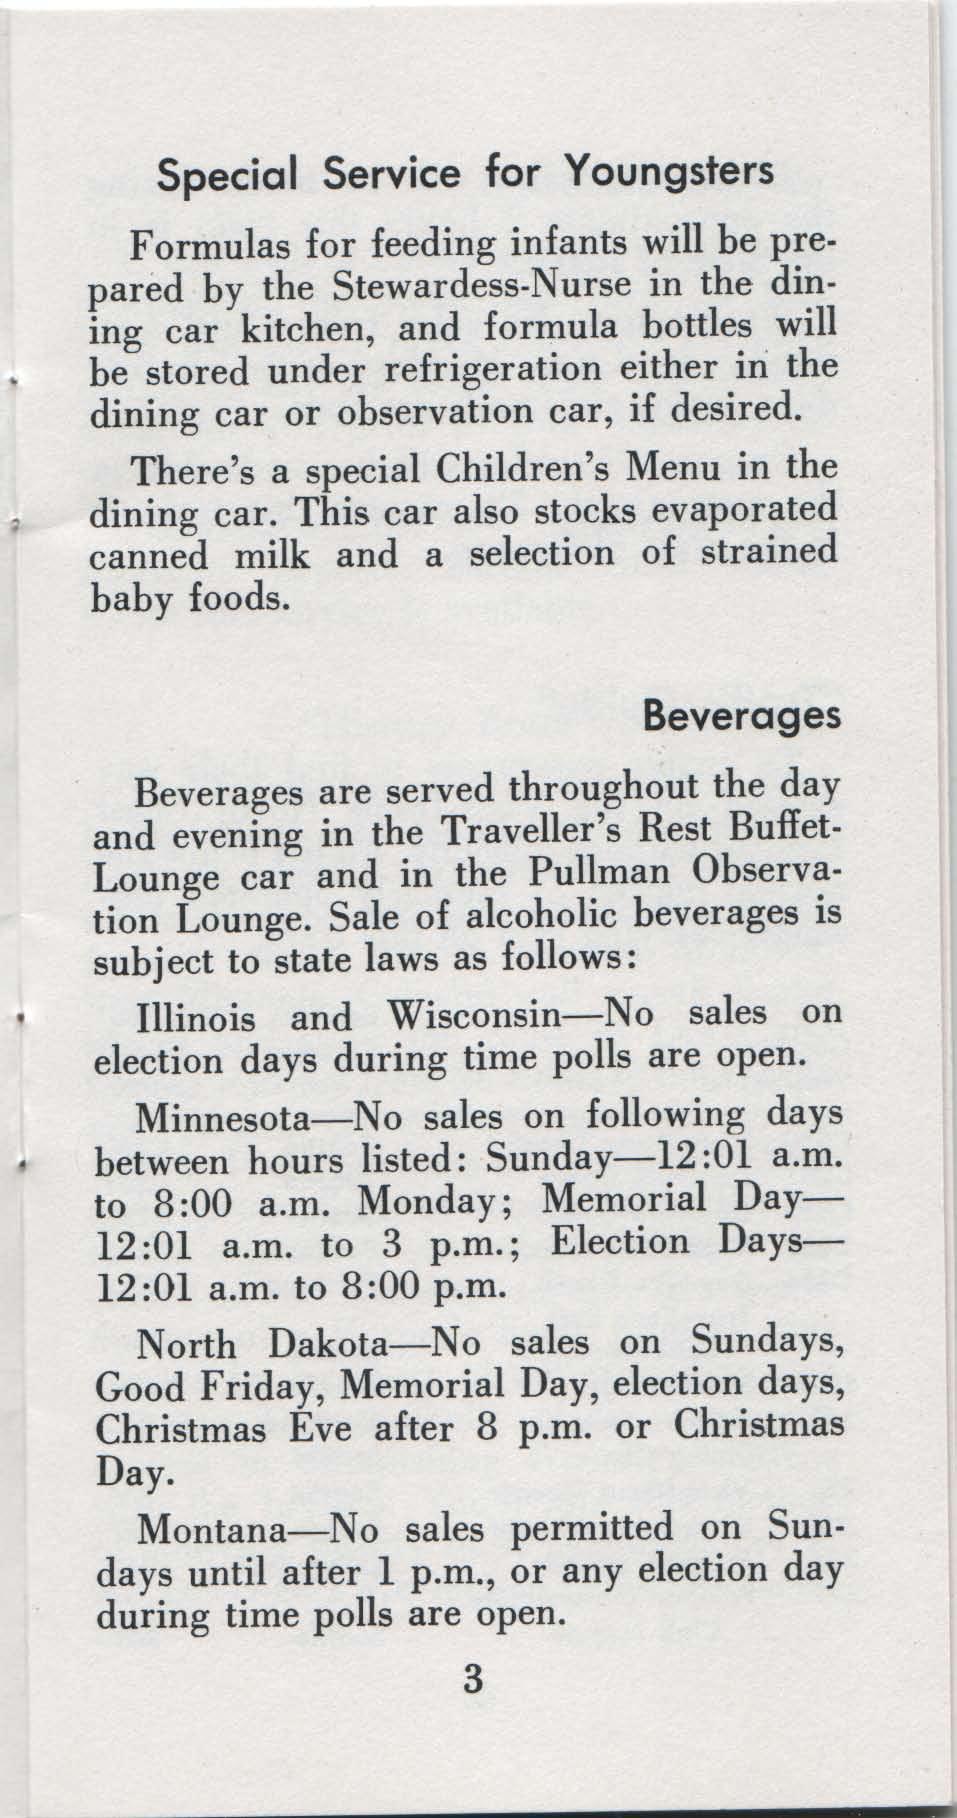 Special Service for Youngsters Formulas for feeding infants will be prepared by the Stewardess-Nurse in the dining car kitchen, and formula bottles will be stored under refrigeration either in the